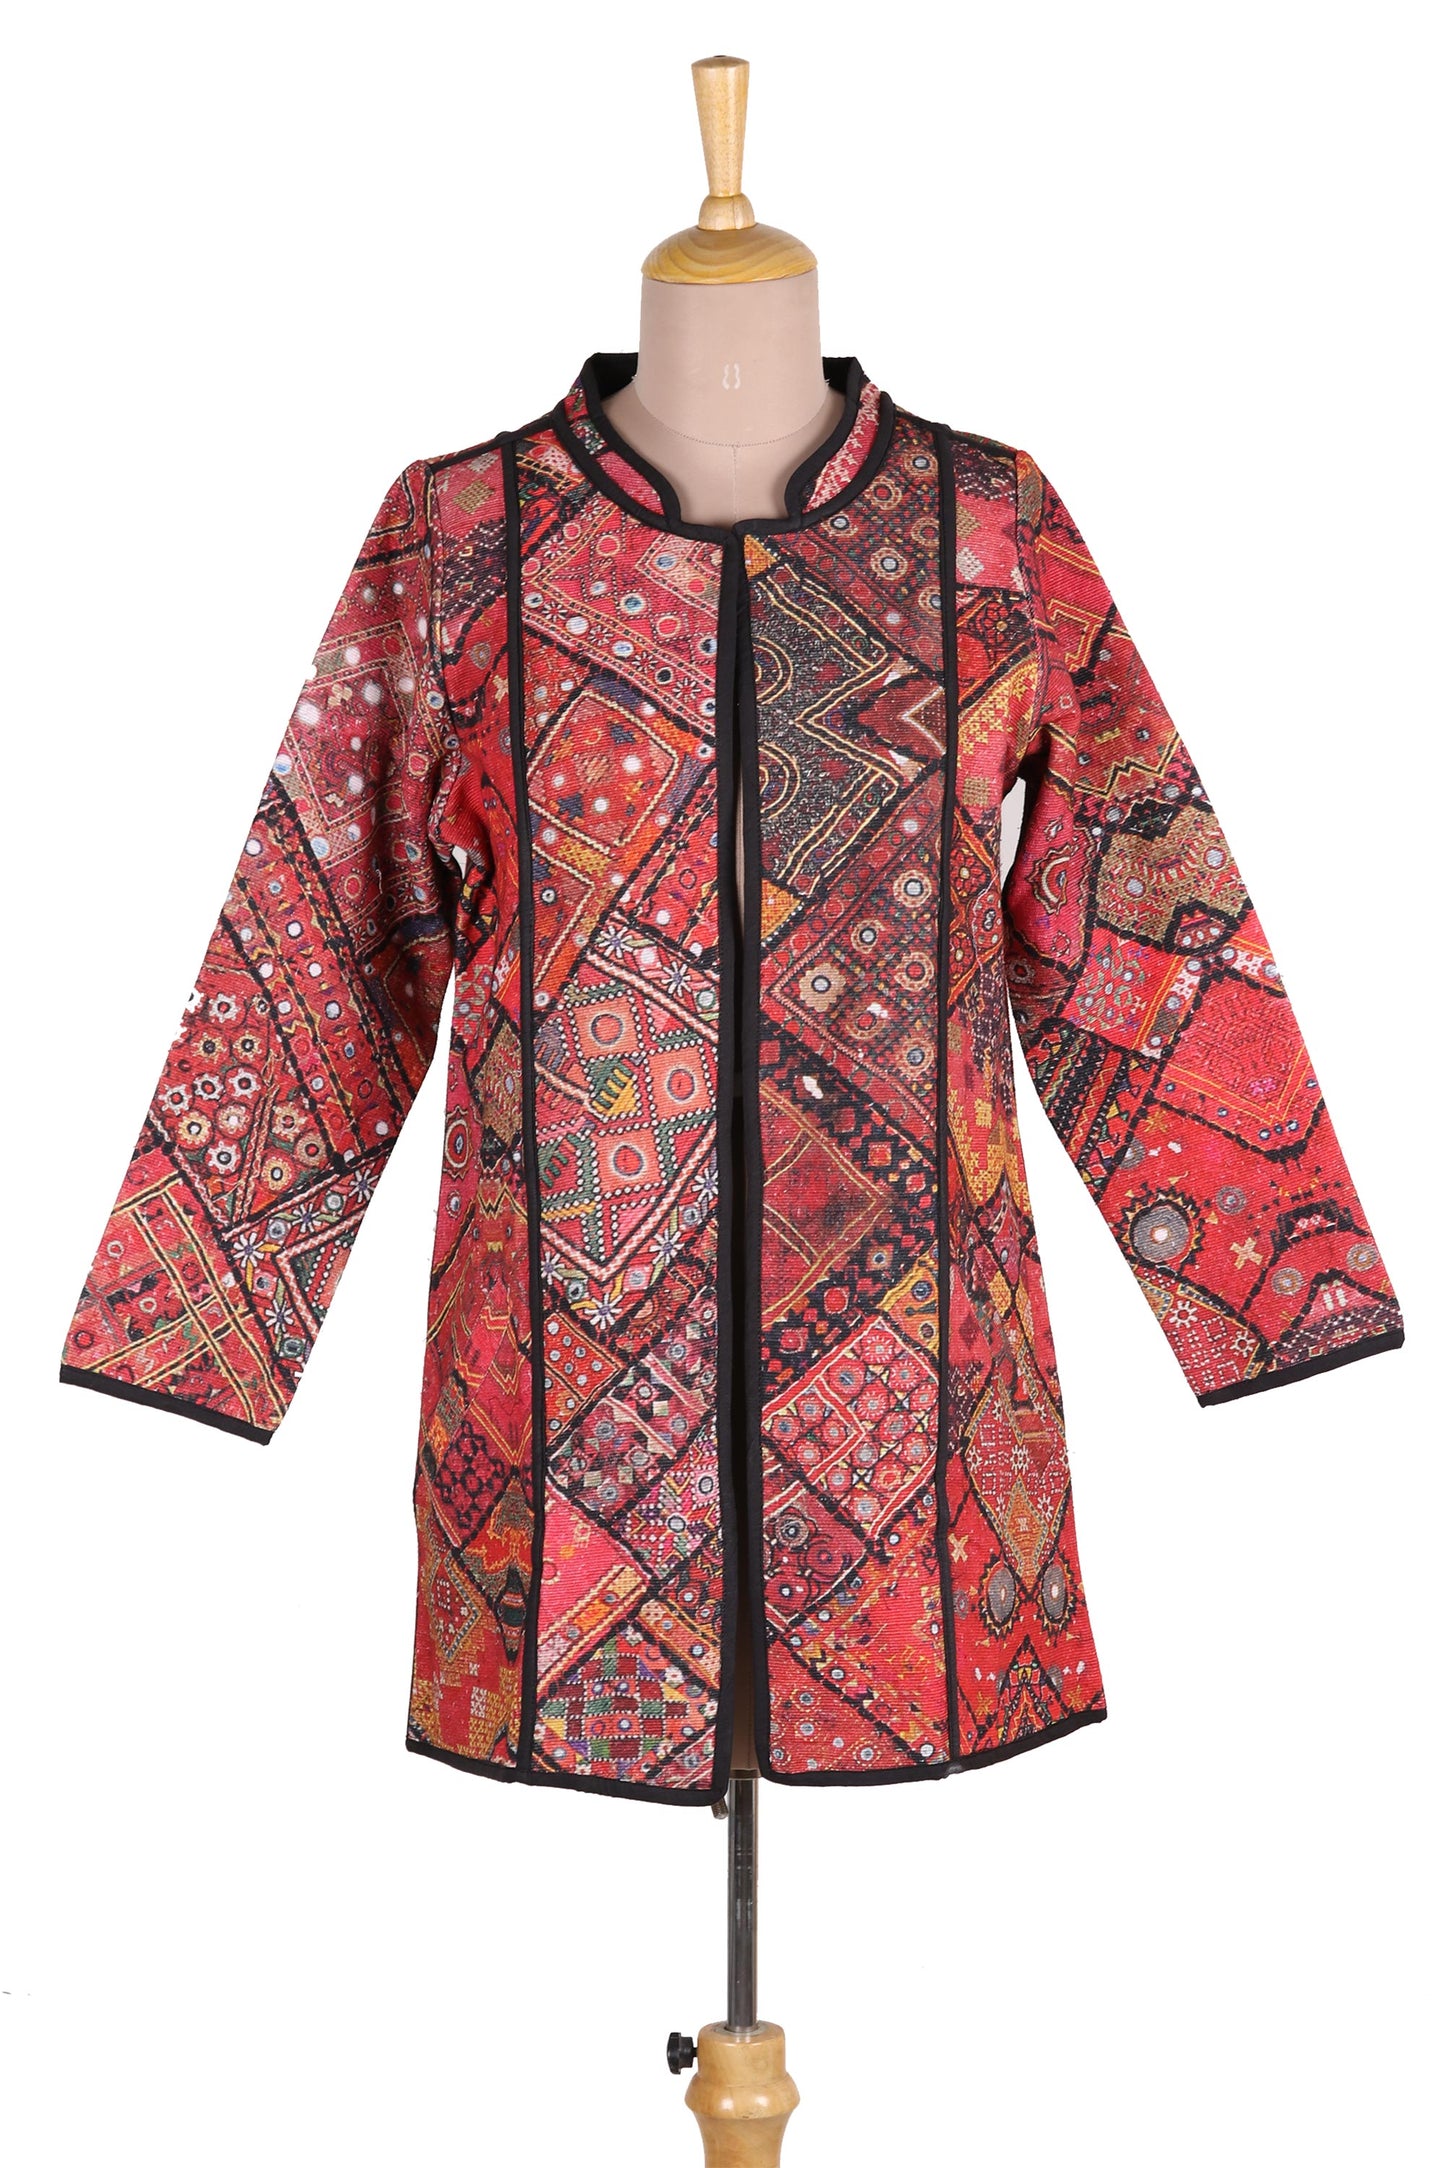 Blissful Variety Printed Cotton Jacket with Various Motifs from India